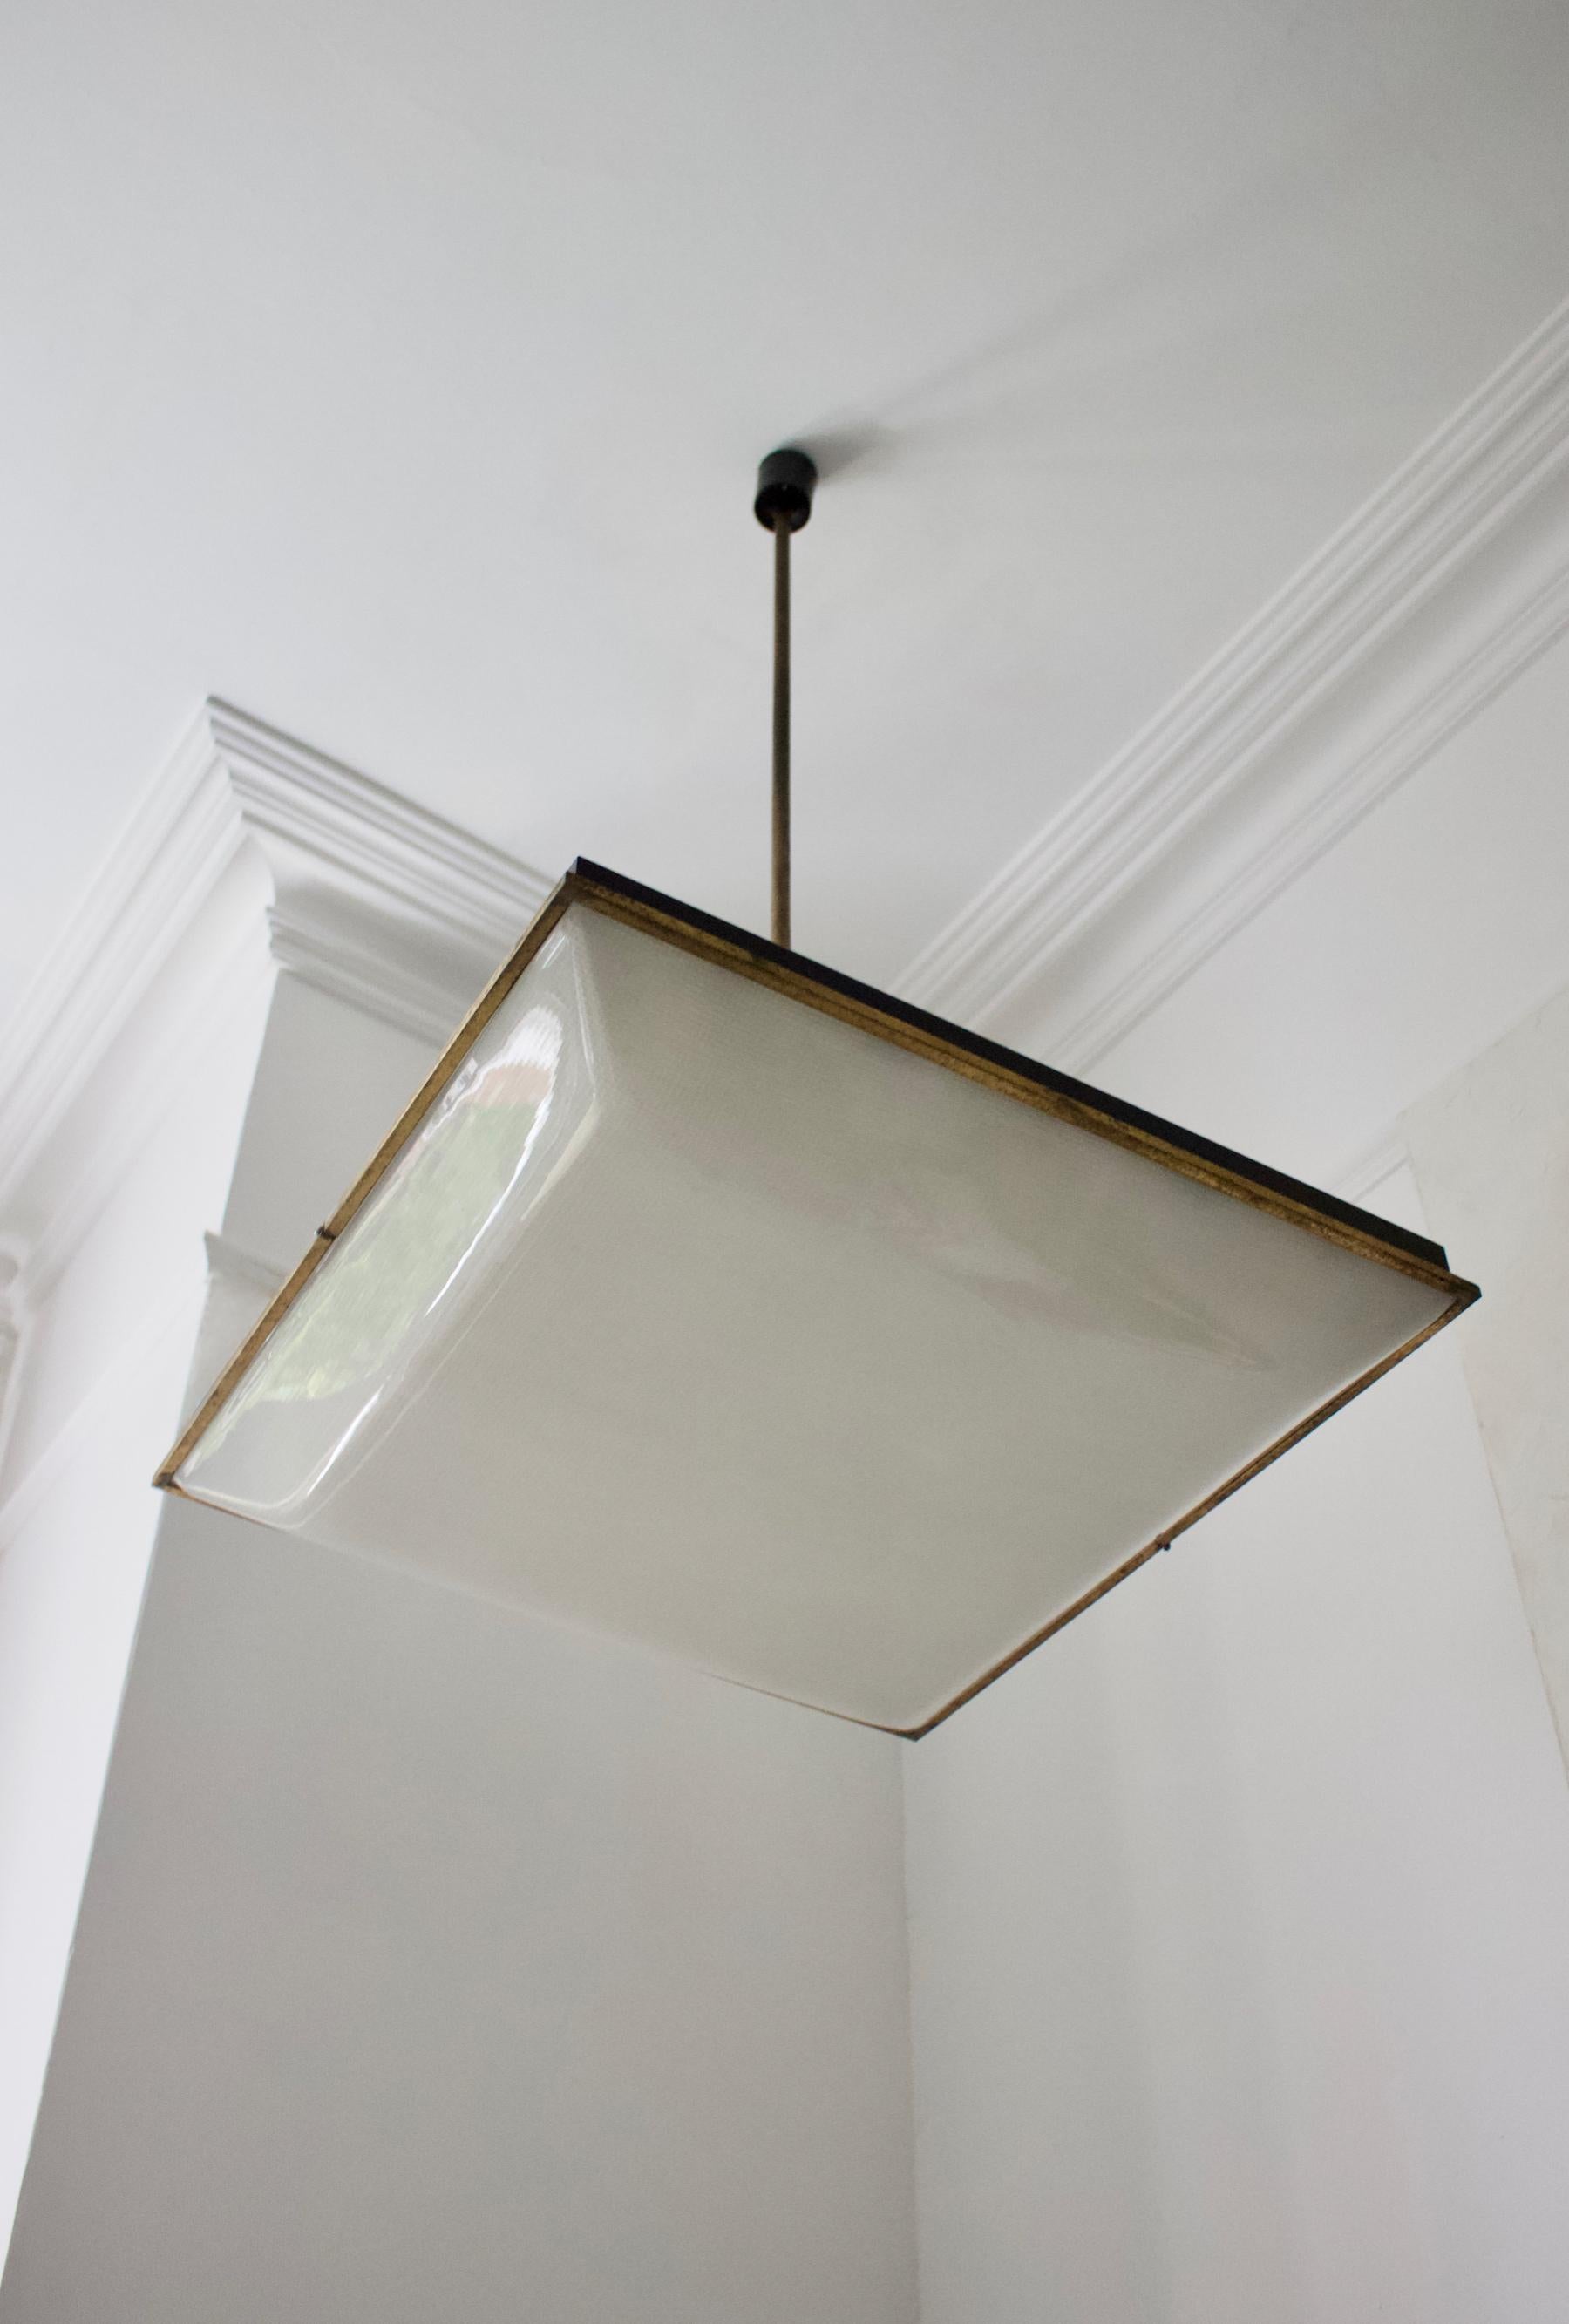 Lacquered Square Ceiling Pendant with Brass Details Attributed to Stilnovo, Italy